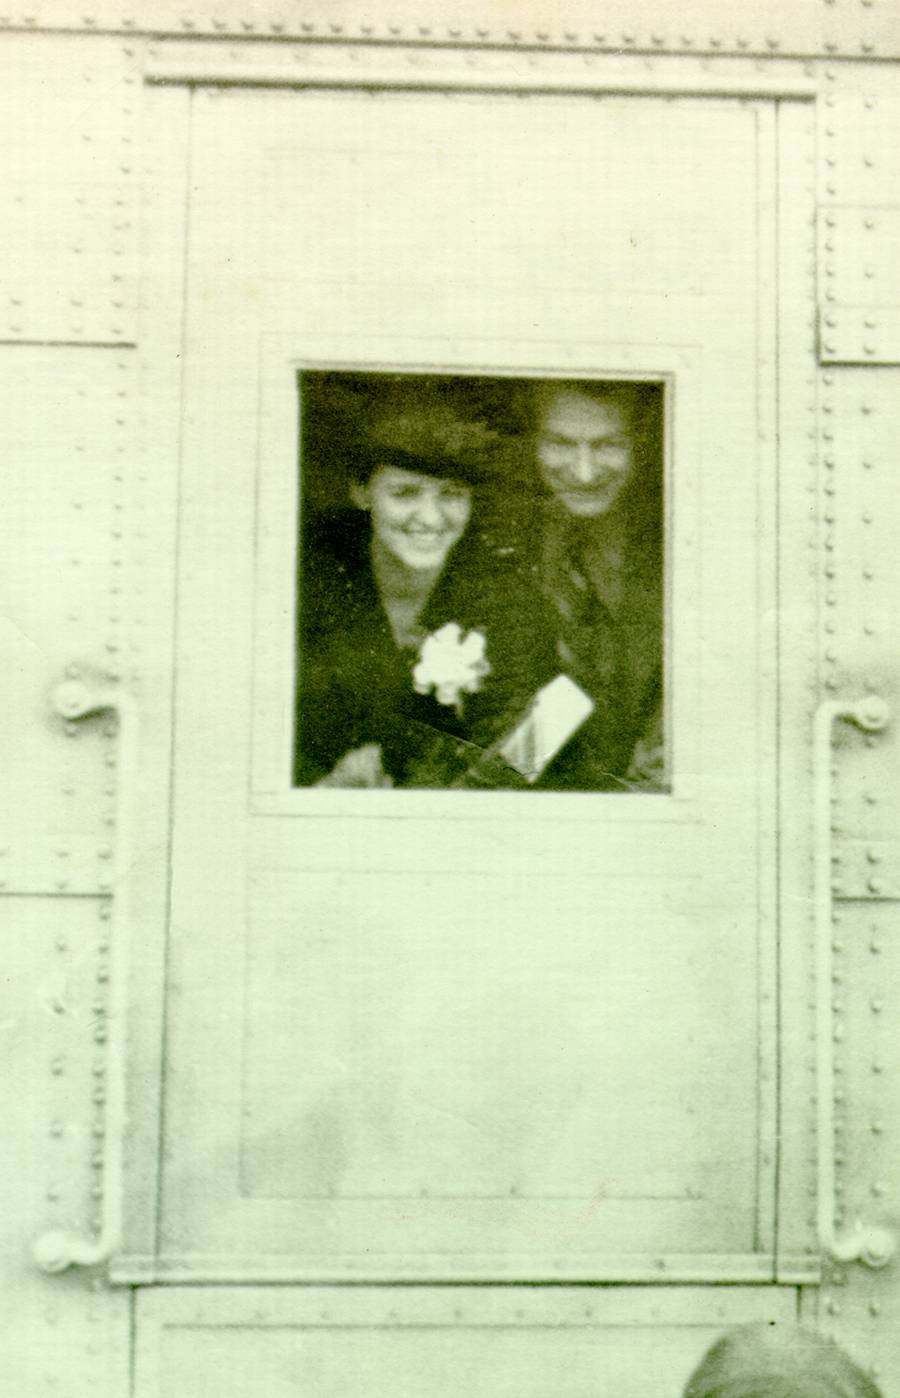 Ava Helen and Linus Pauling peeking through the window of the Union Pacific Streamliner City Of Los Angeles.